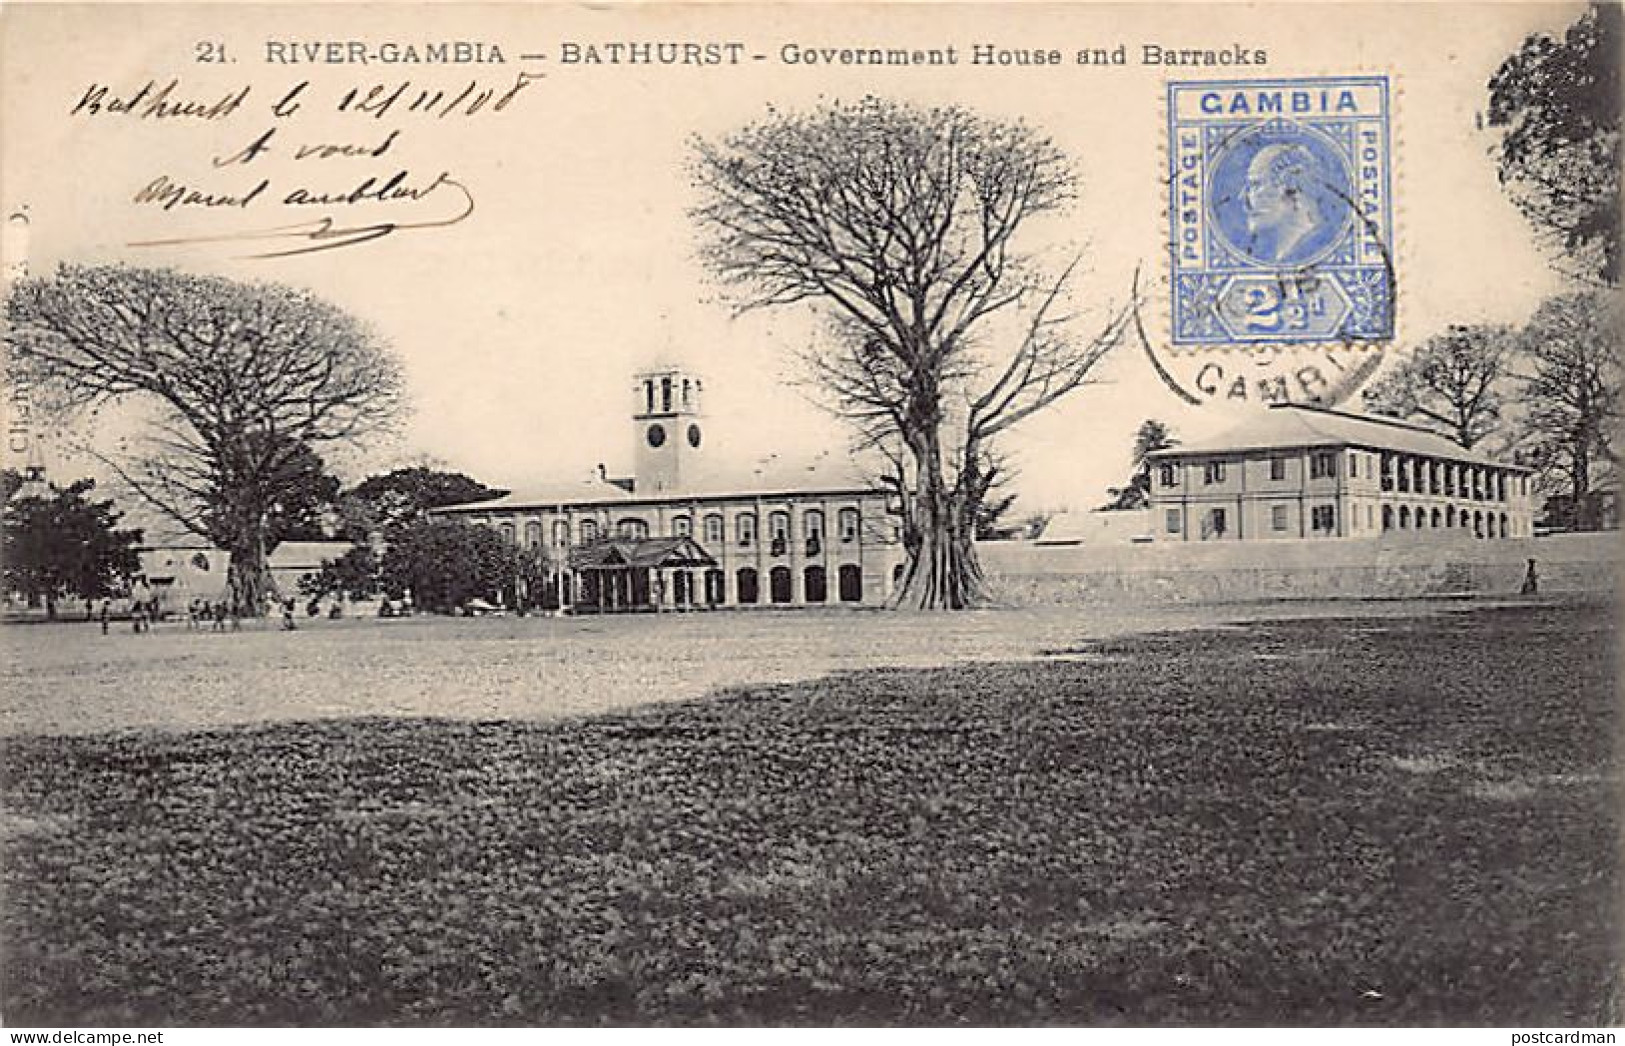 Gambia - BATHURST - Government House And Barracks - Publ. C.F.A.O. 21 - Gambia